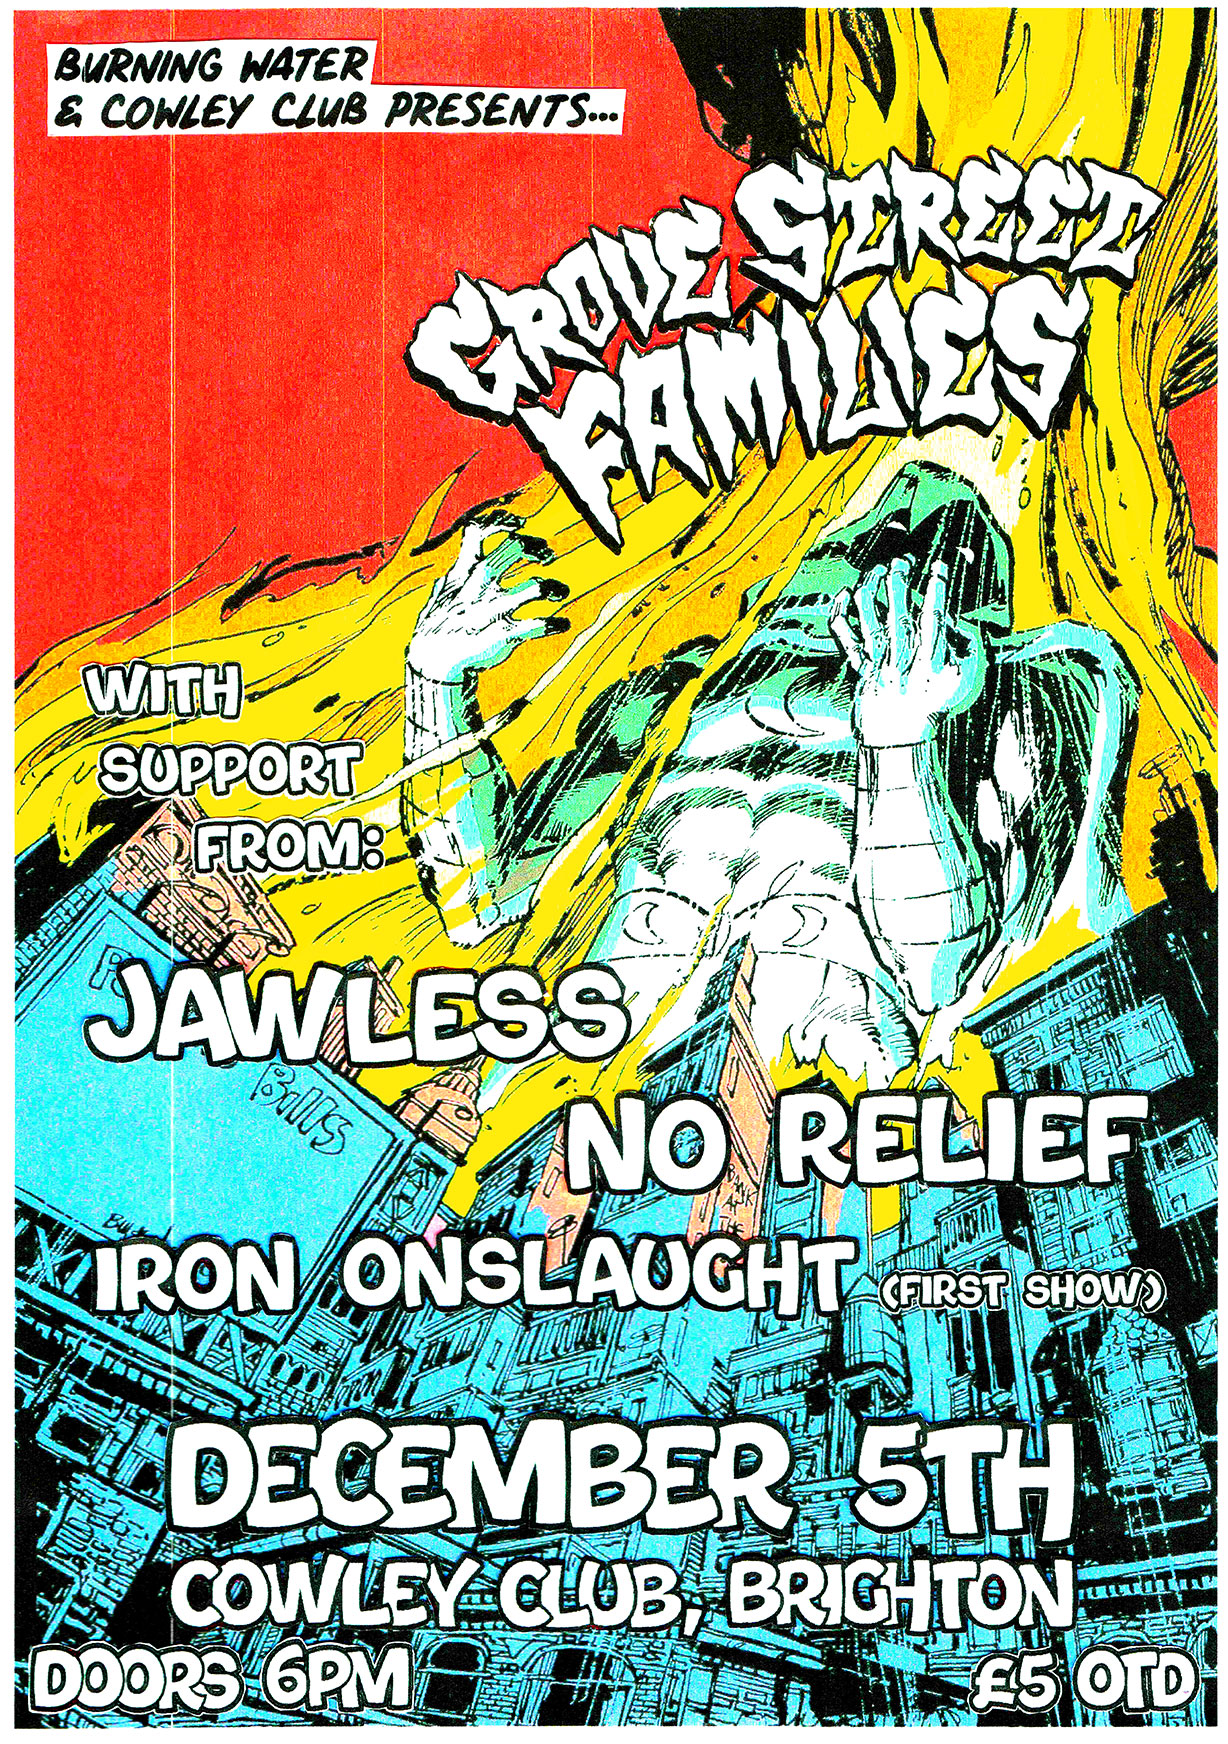 Grove Street Families / Jawless / No Relief / Iron Onslaught